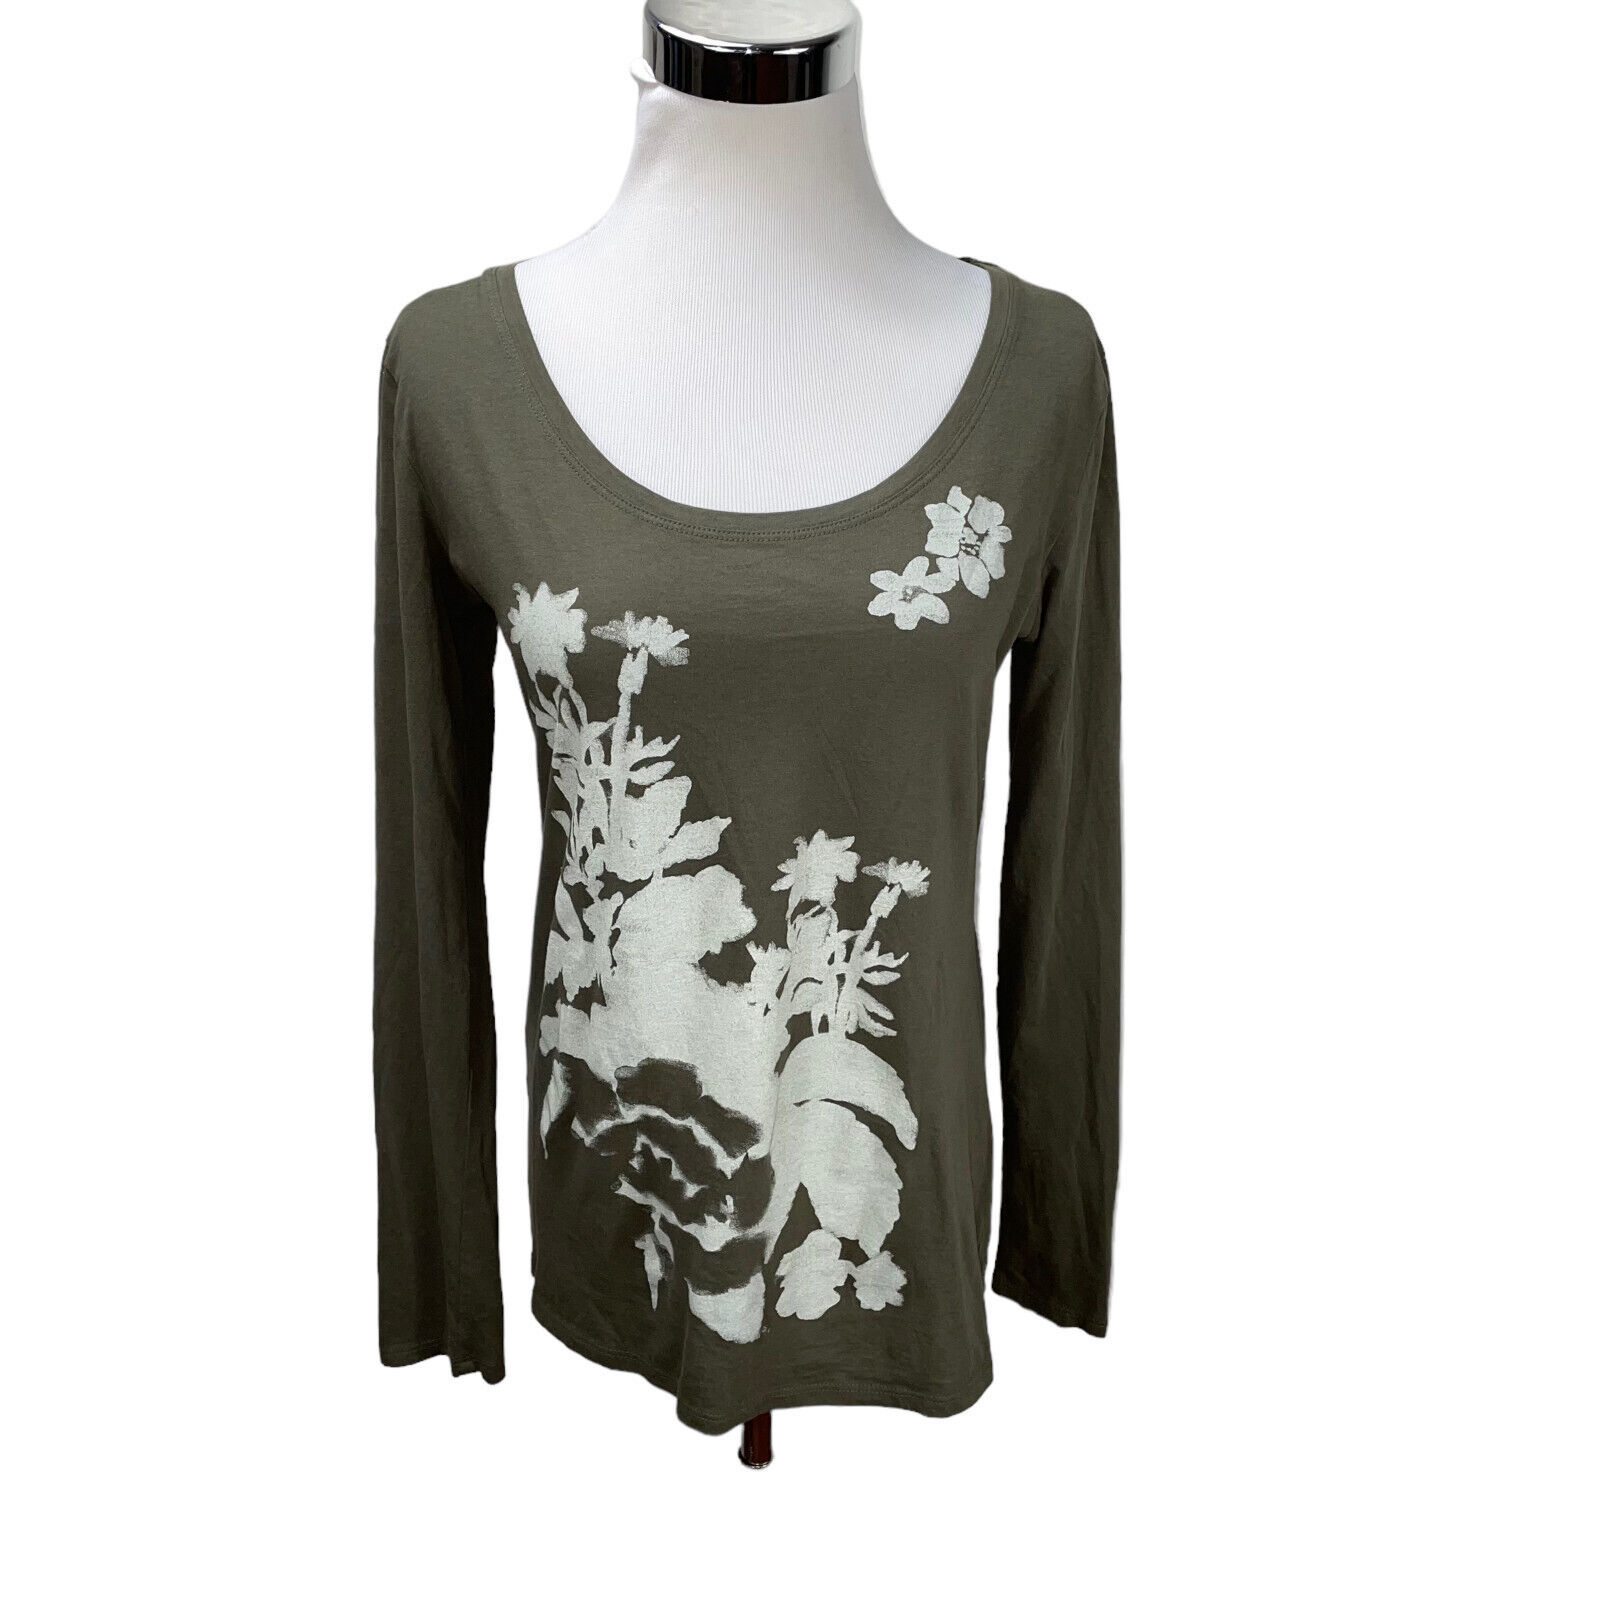 Primary image for Lucy Dark Green Floral Pima Cotton Long Sleeve Knit Top T-Shirt Stretch Active